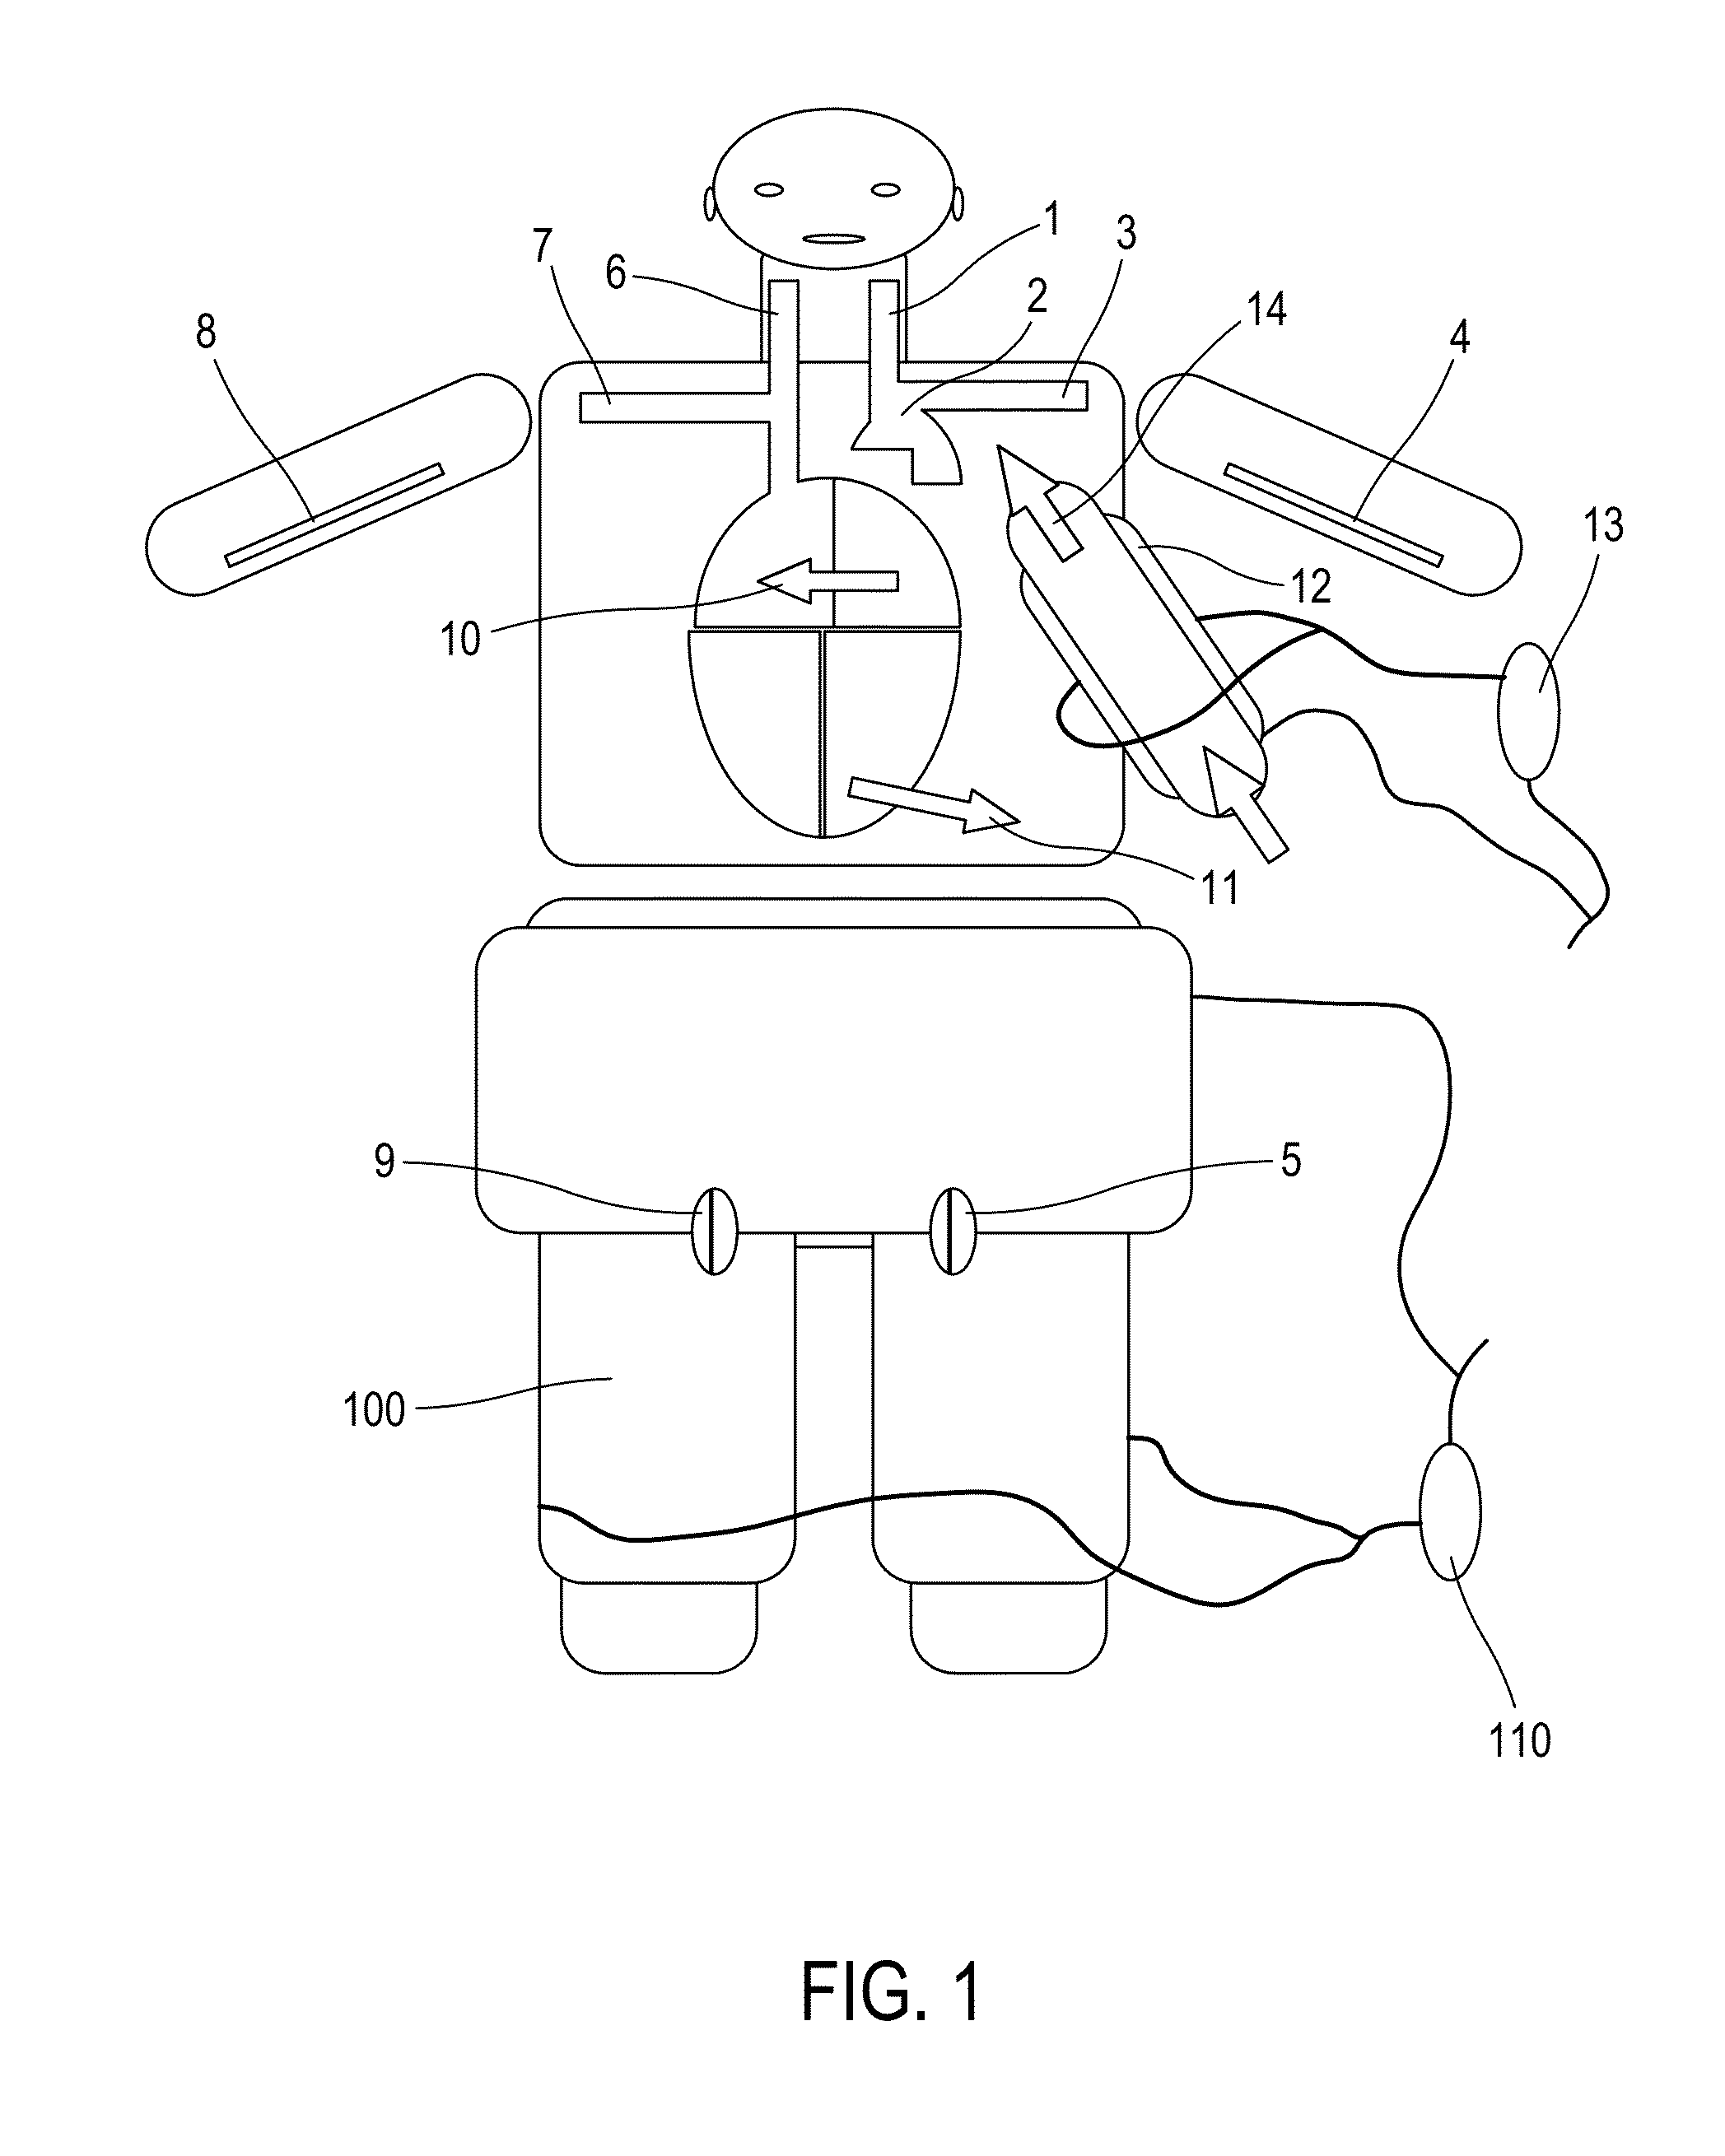 Therapeutic and surgical treatment method for providing cardiopulmonary and circulatory assist device